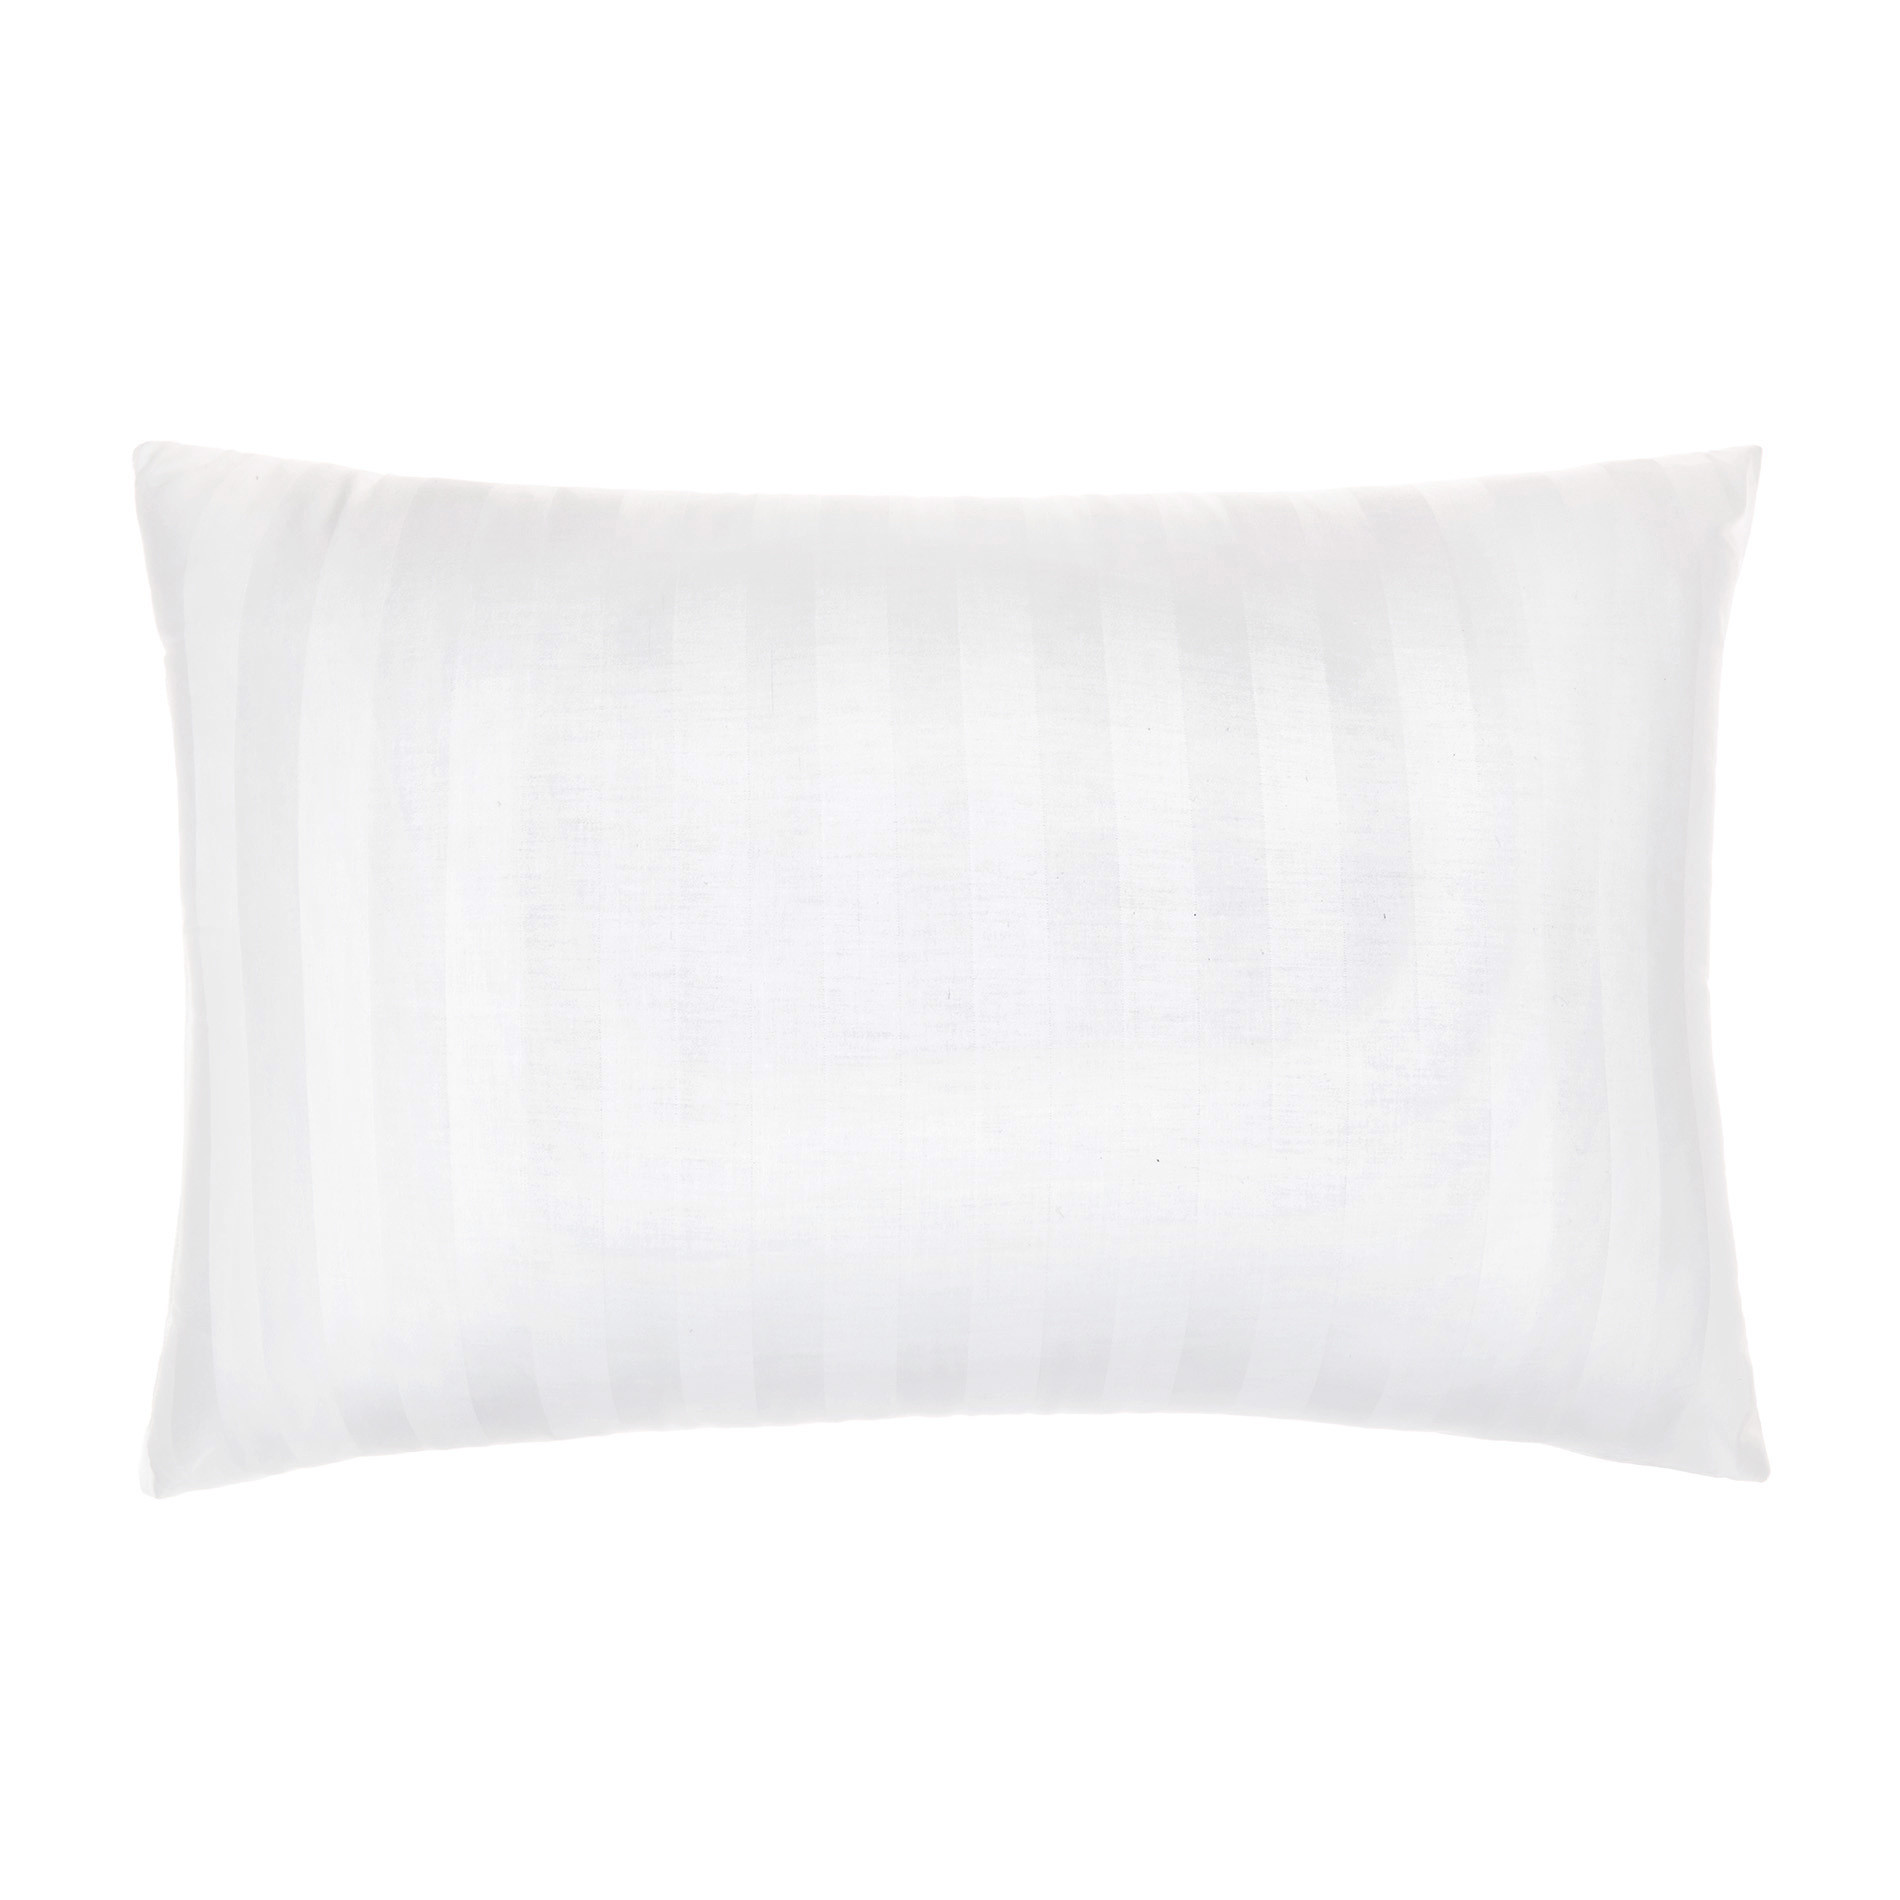 Orthopedic pillow in cotton satin, White, large image number 0